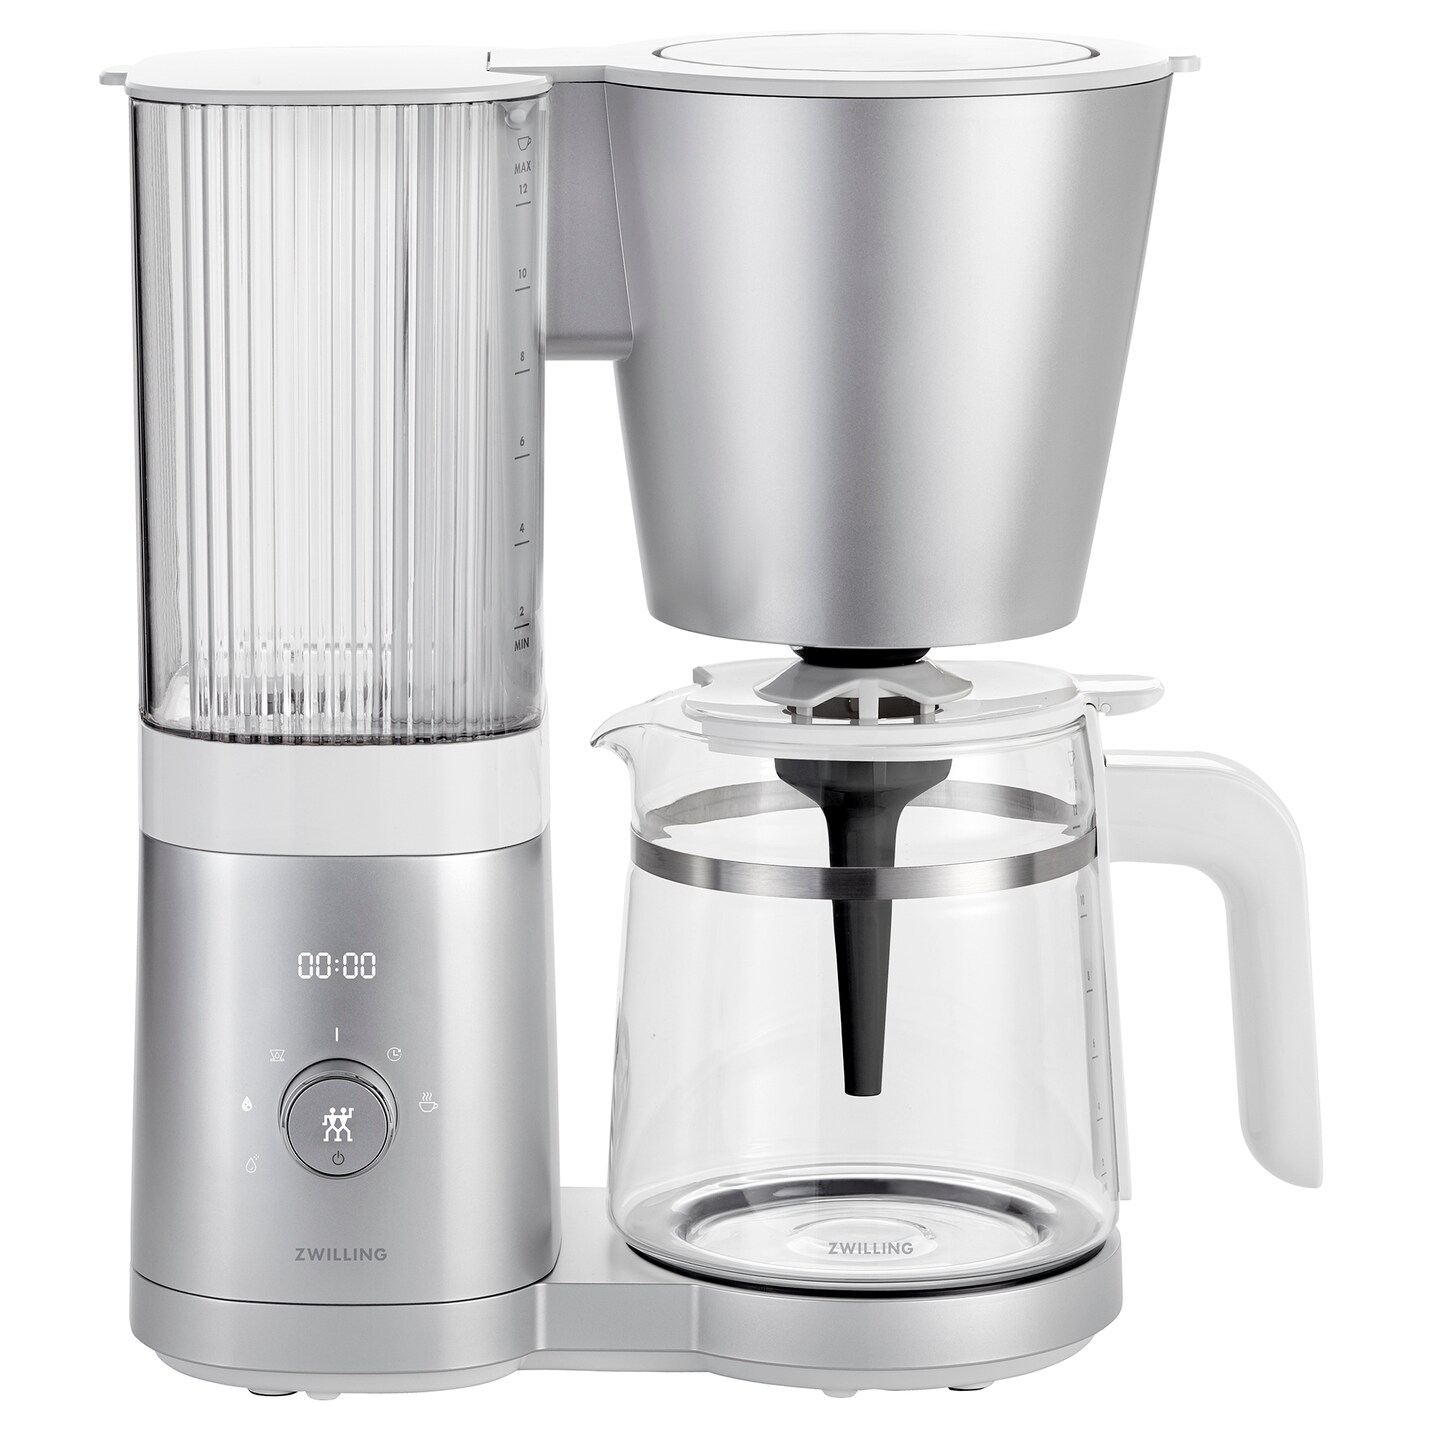 ZWILLING Enfinigy Glass Drip Coffee Maker 12 Cup, Awarded the SCA Golden Cup Standard